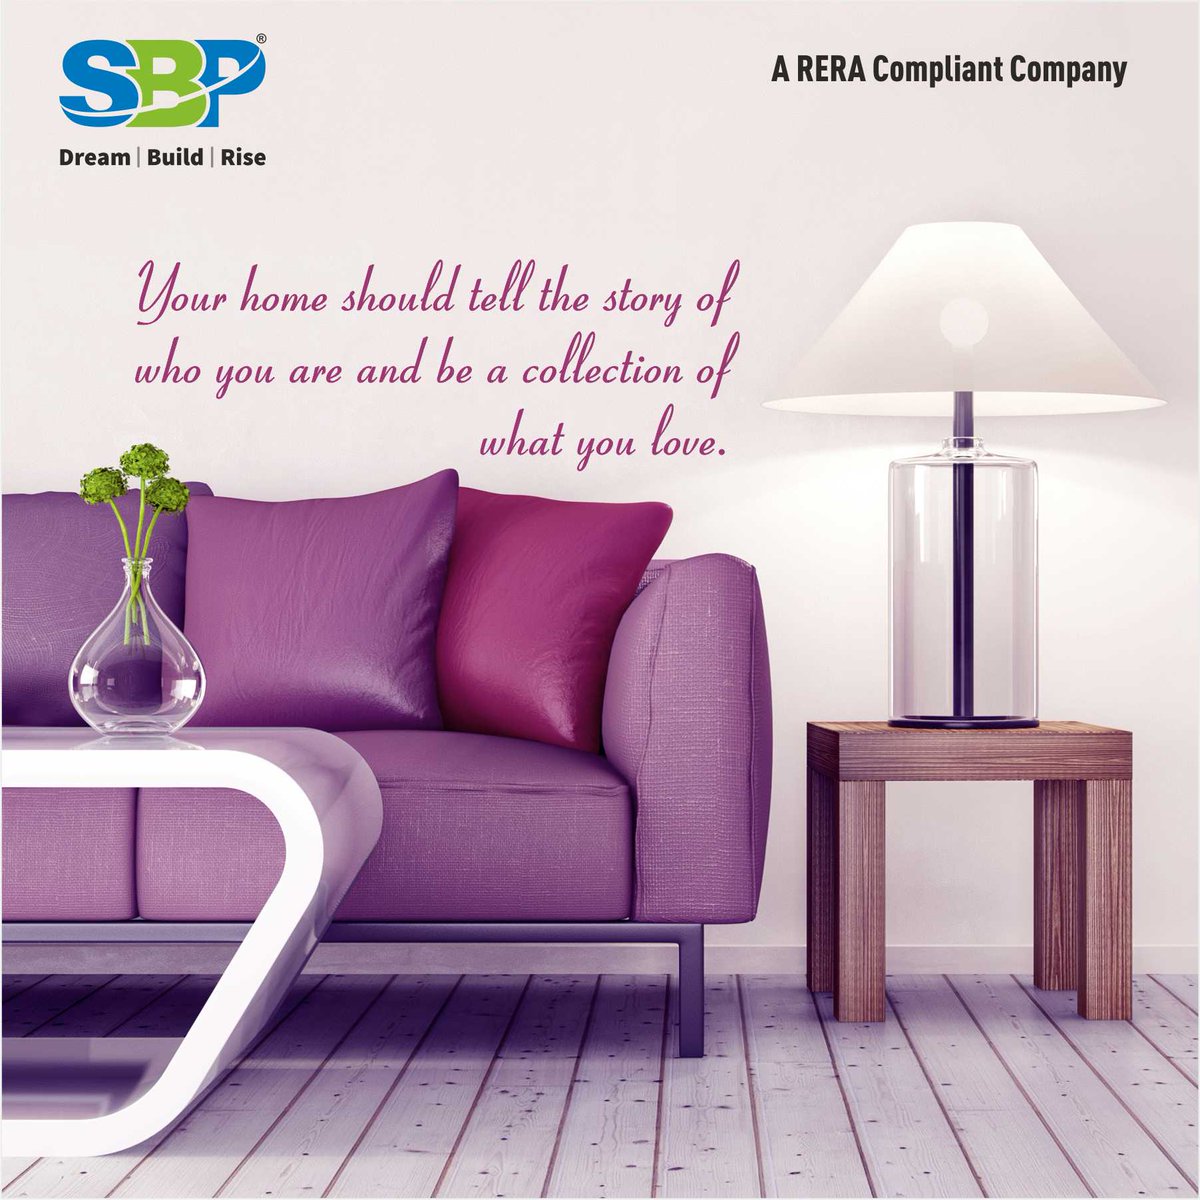 Your home should tell the story of what you are and be a collection of what you love.

#sbpgroup #gatewayofdreams #housingpark #2and3bhkapartments #zirakpur #god #ownhome #home